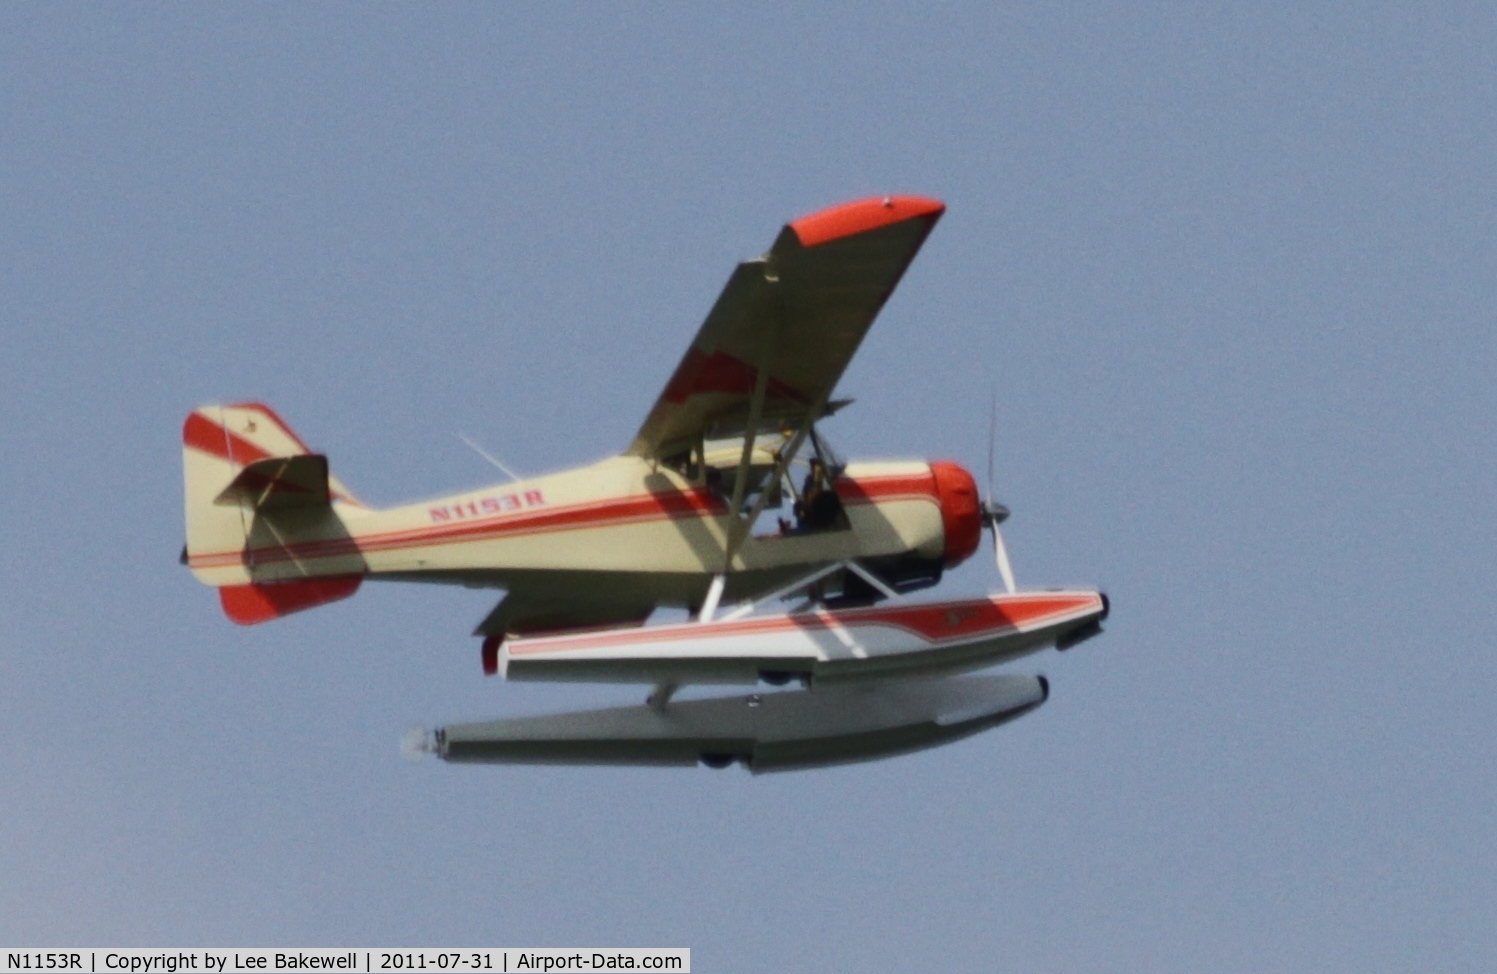 N1153R, Denney Kifox Model 3 C/N 880, While operating over Forest Lake, MN